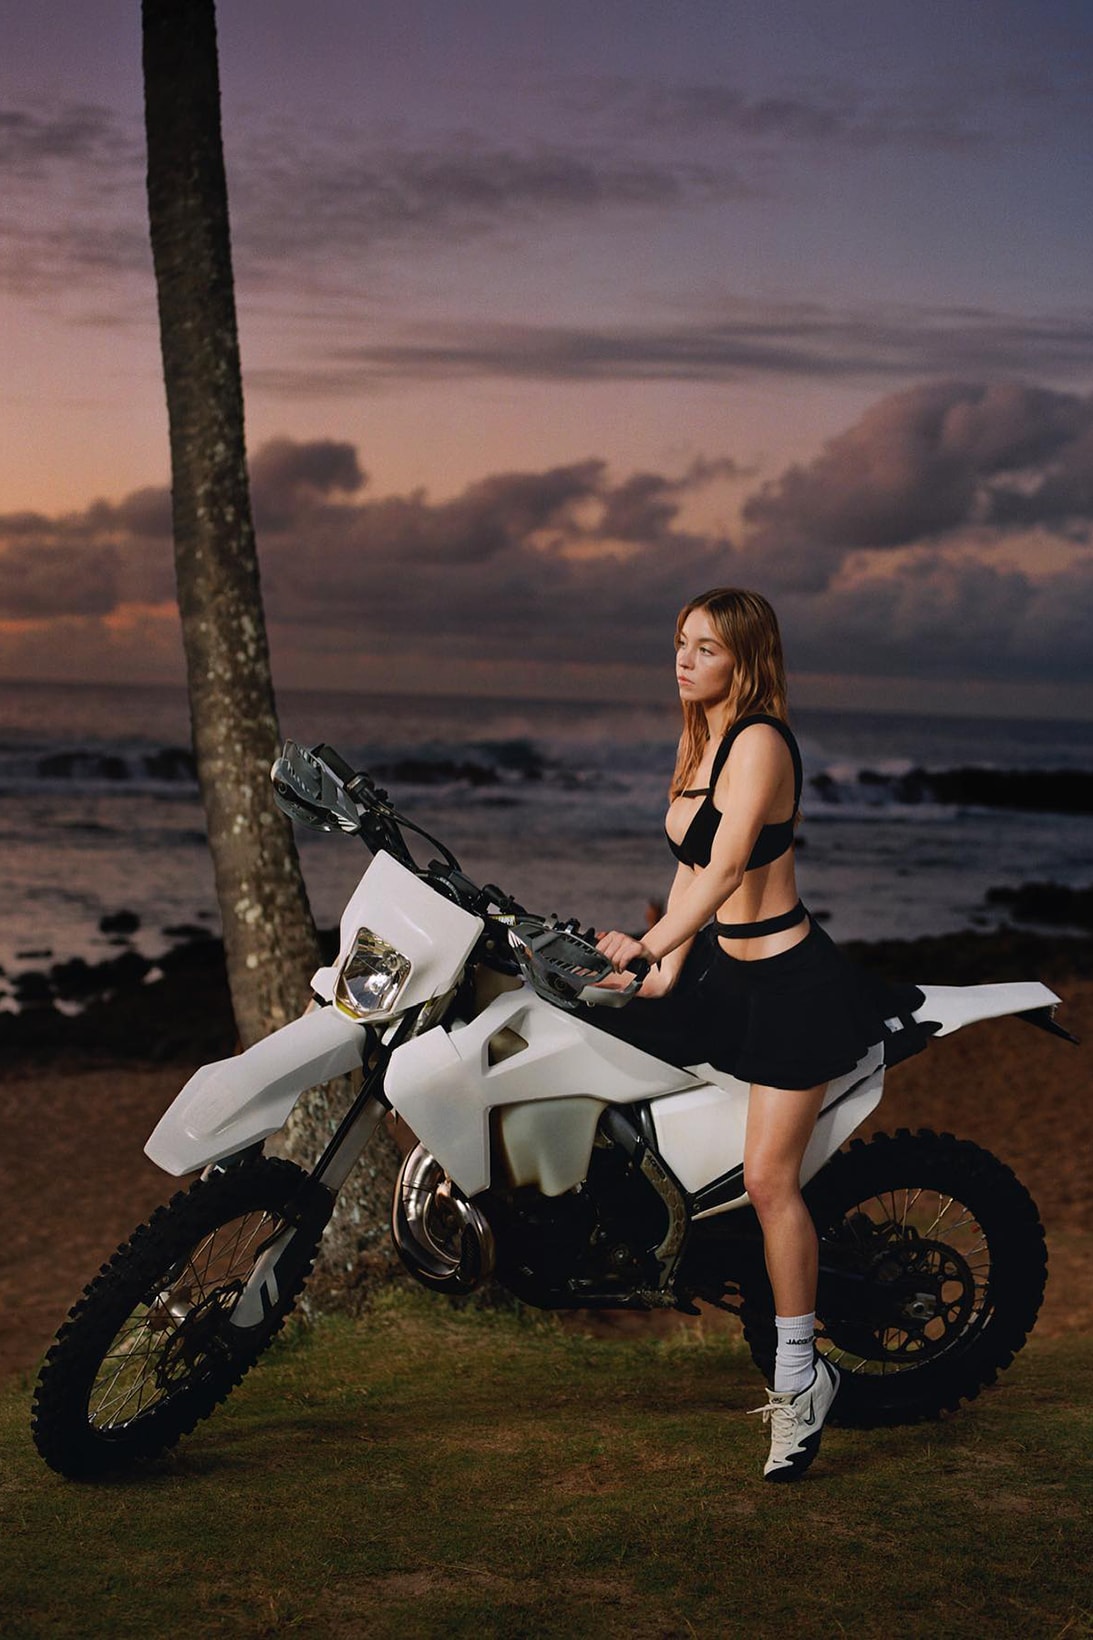 Sydney Sweeney Jacquemus Nike Campaign Collaboration Motorcycle Euphoria Actress